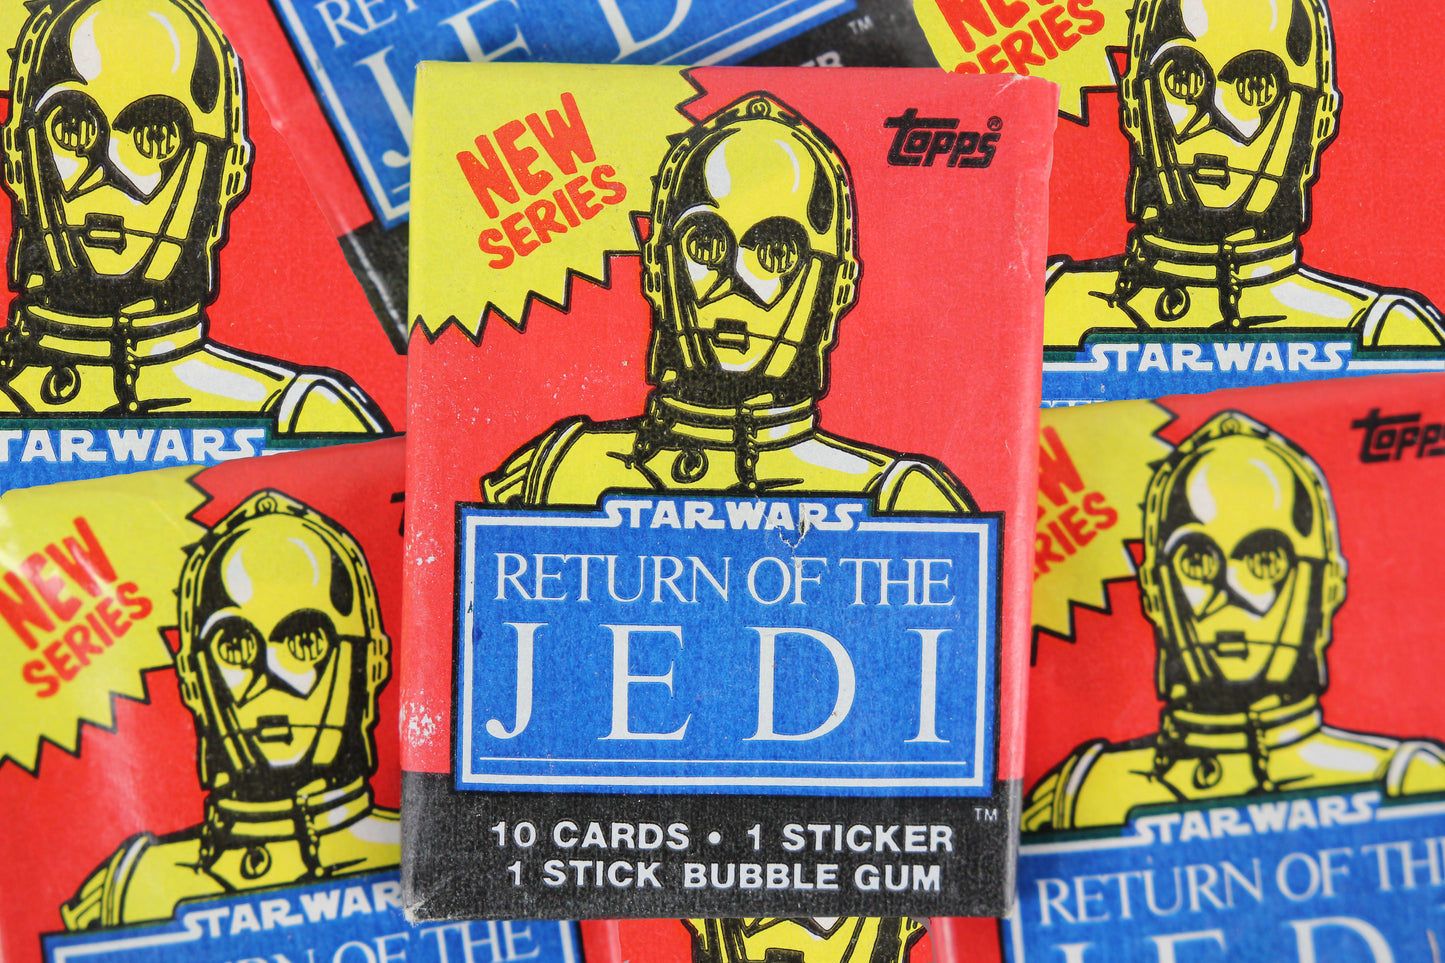 Topps Star Wars Return of the Jedi Series 2 Collectible Trading Cards, One Wax Pack, C-3PO Wrapper, 1983